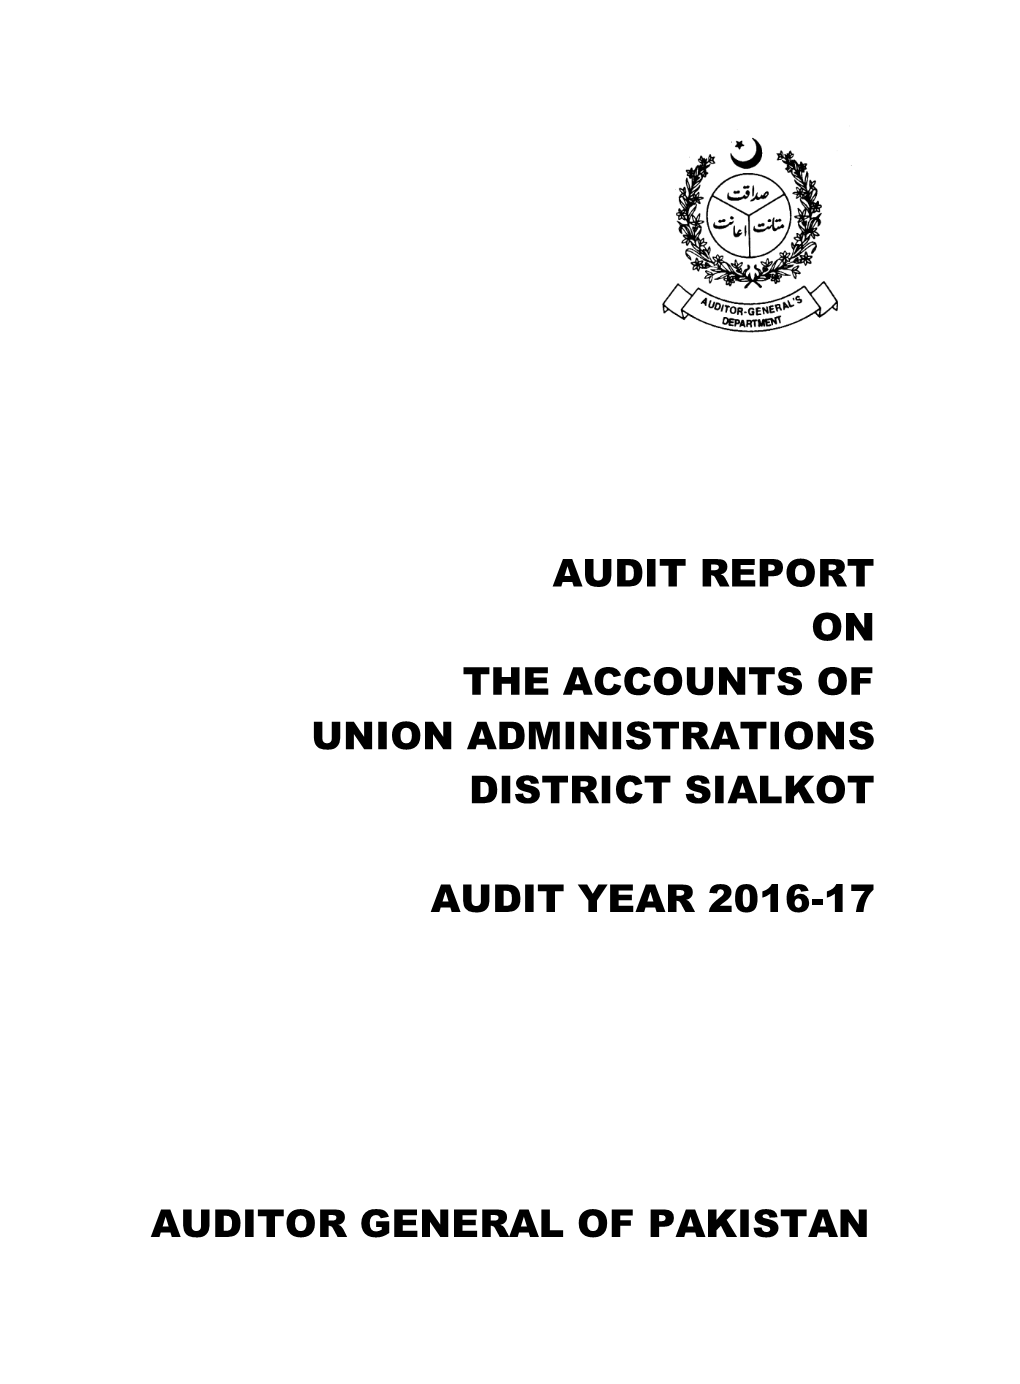 Audit Report on the Accounts of Union Administrations District Sialkot